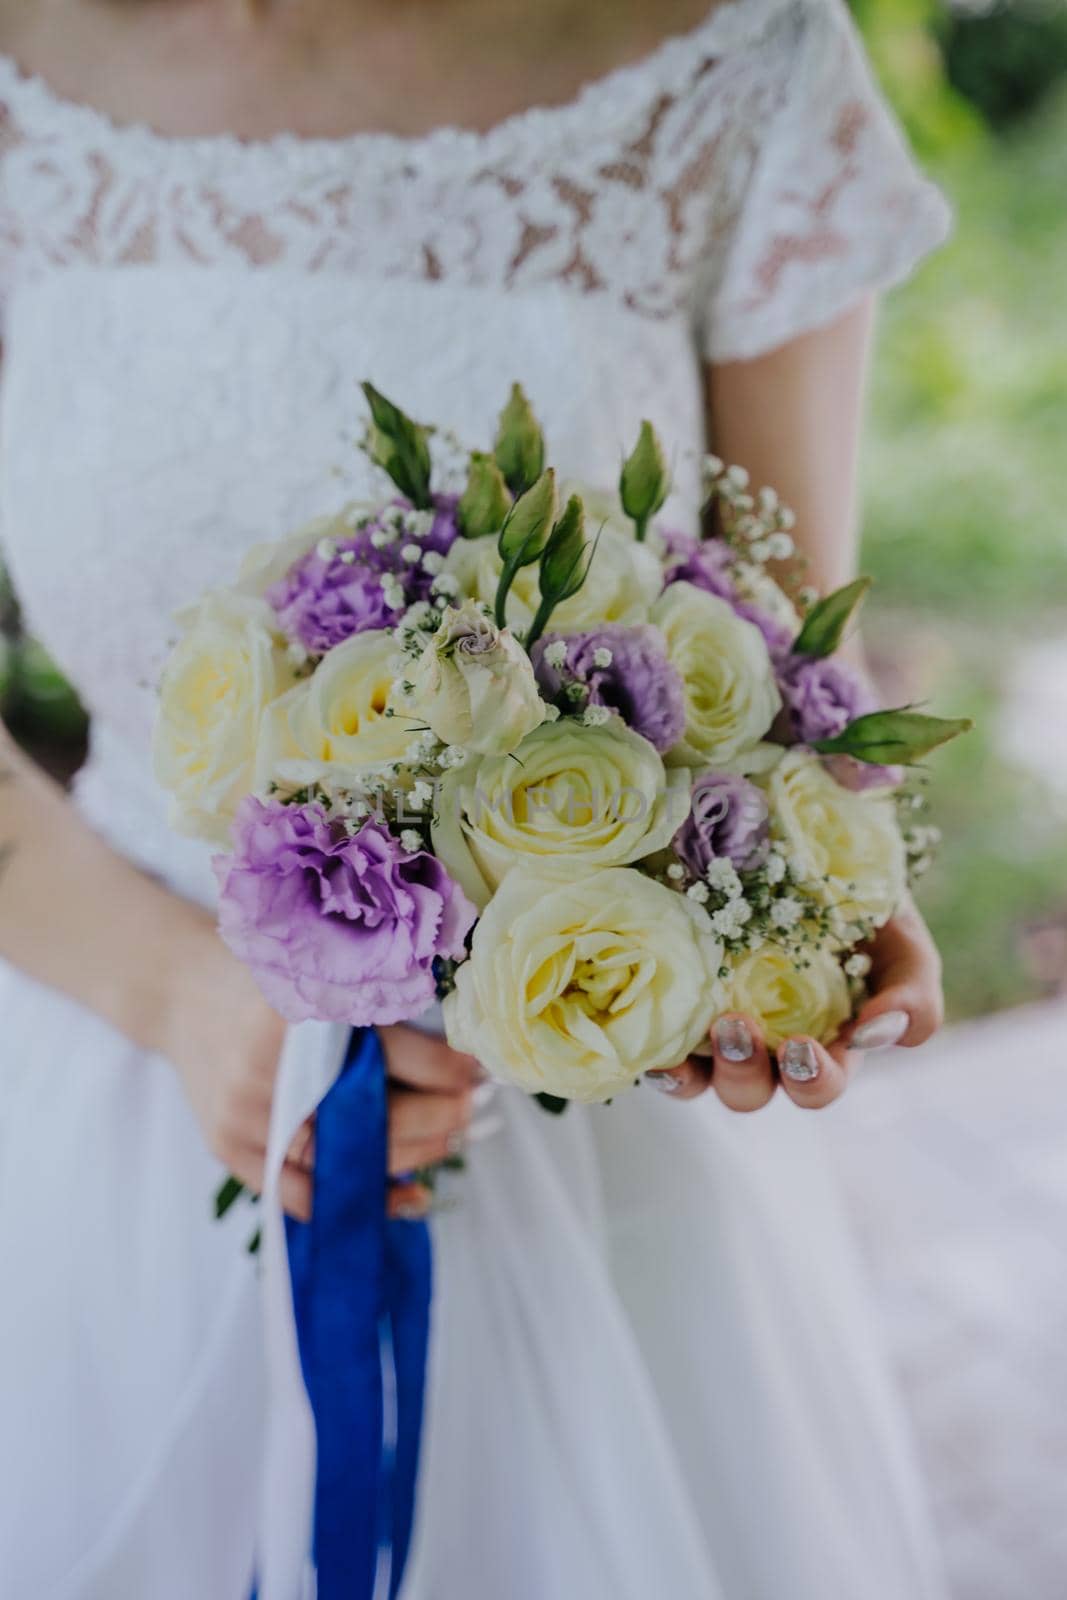 A beautiful and delicate bouquet in the hands of the bride. by Rodnova